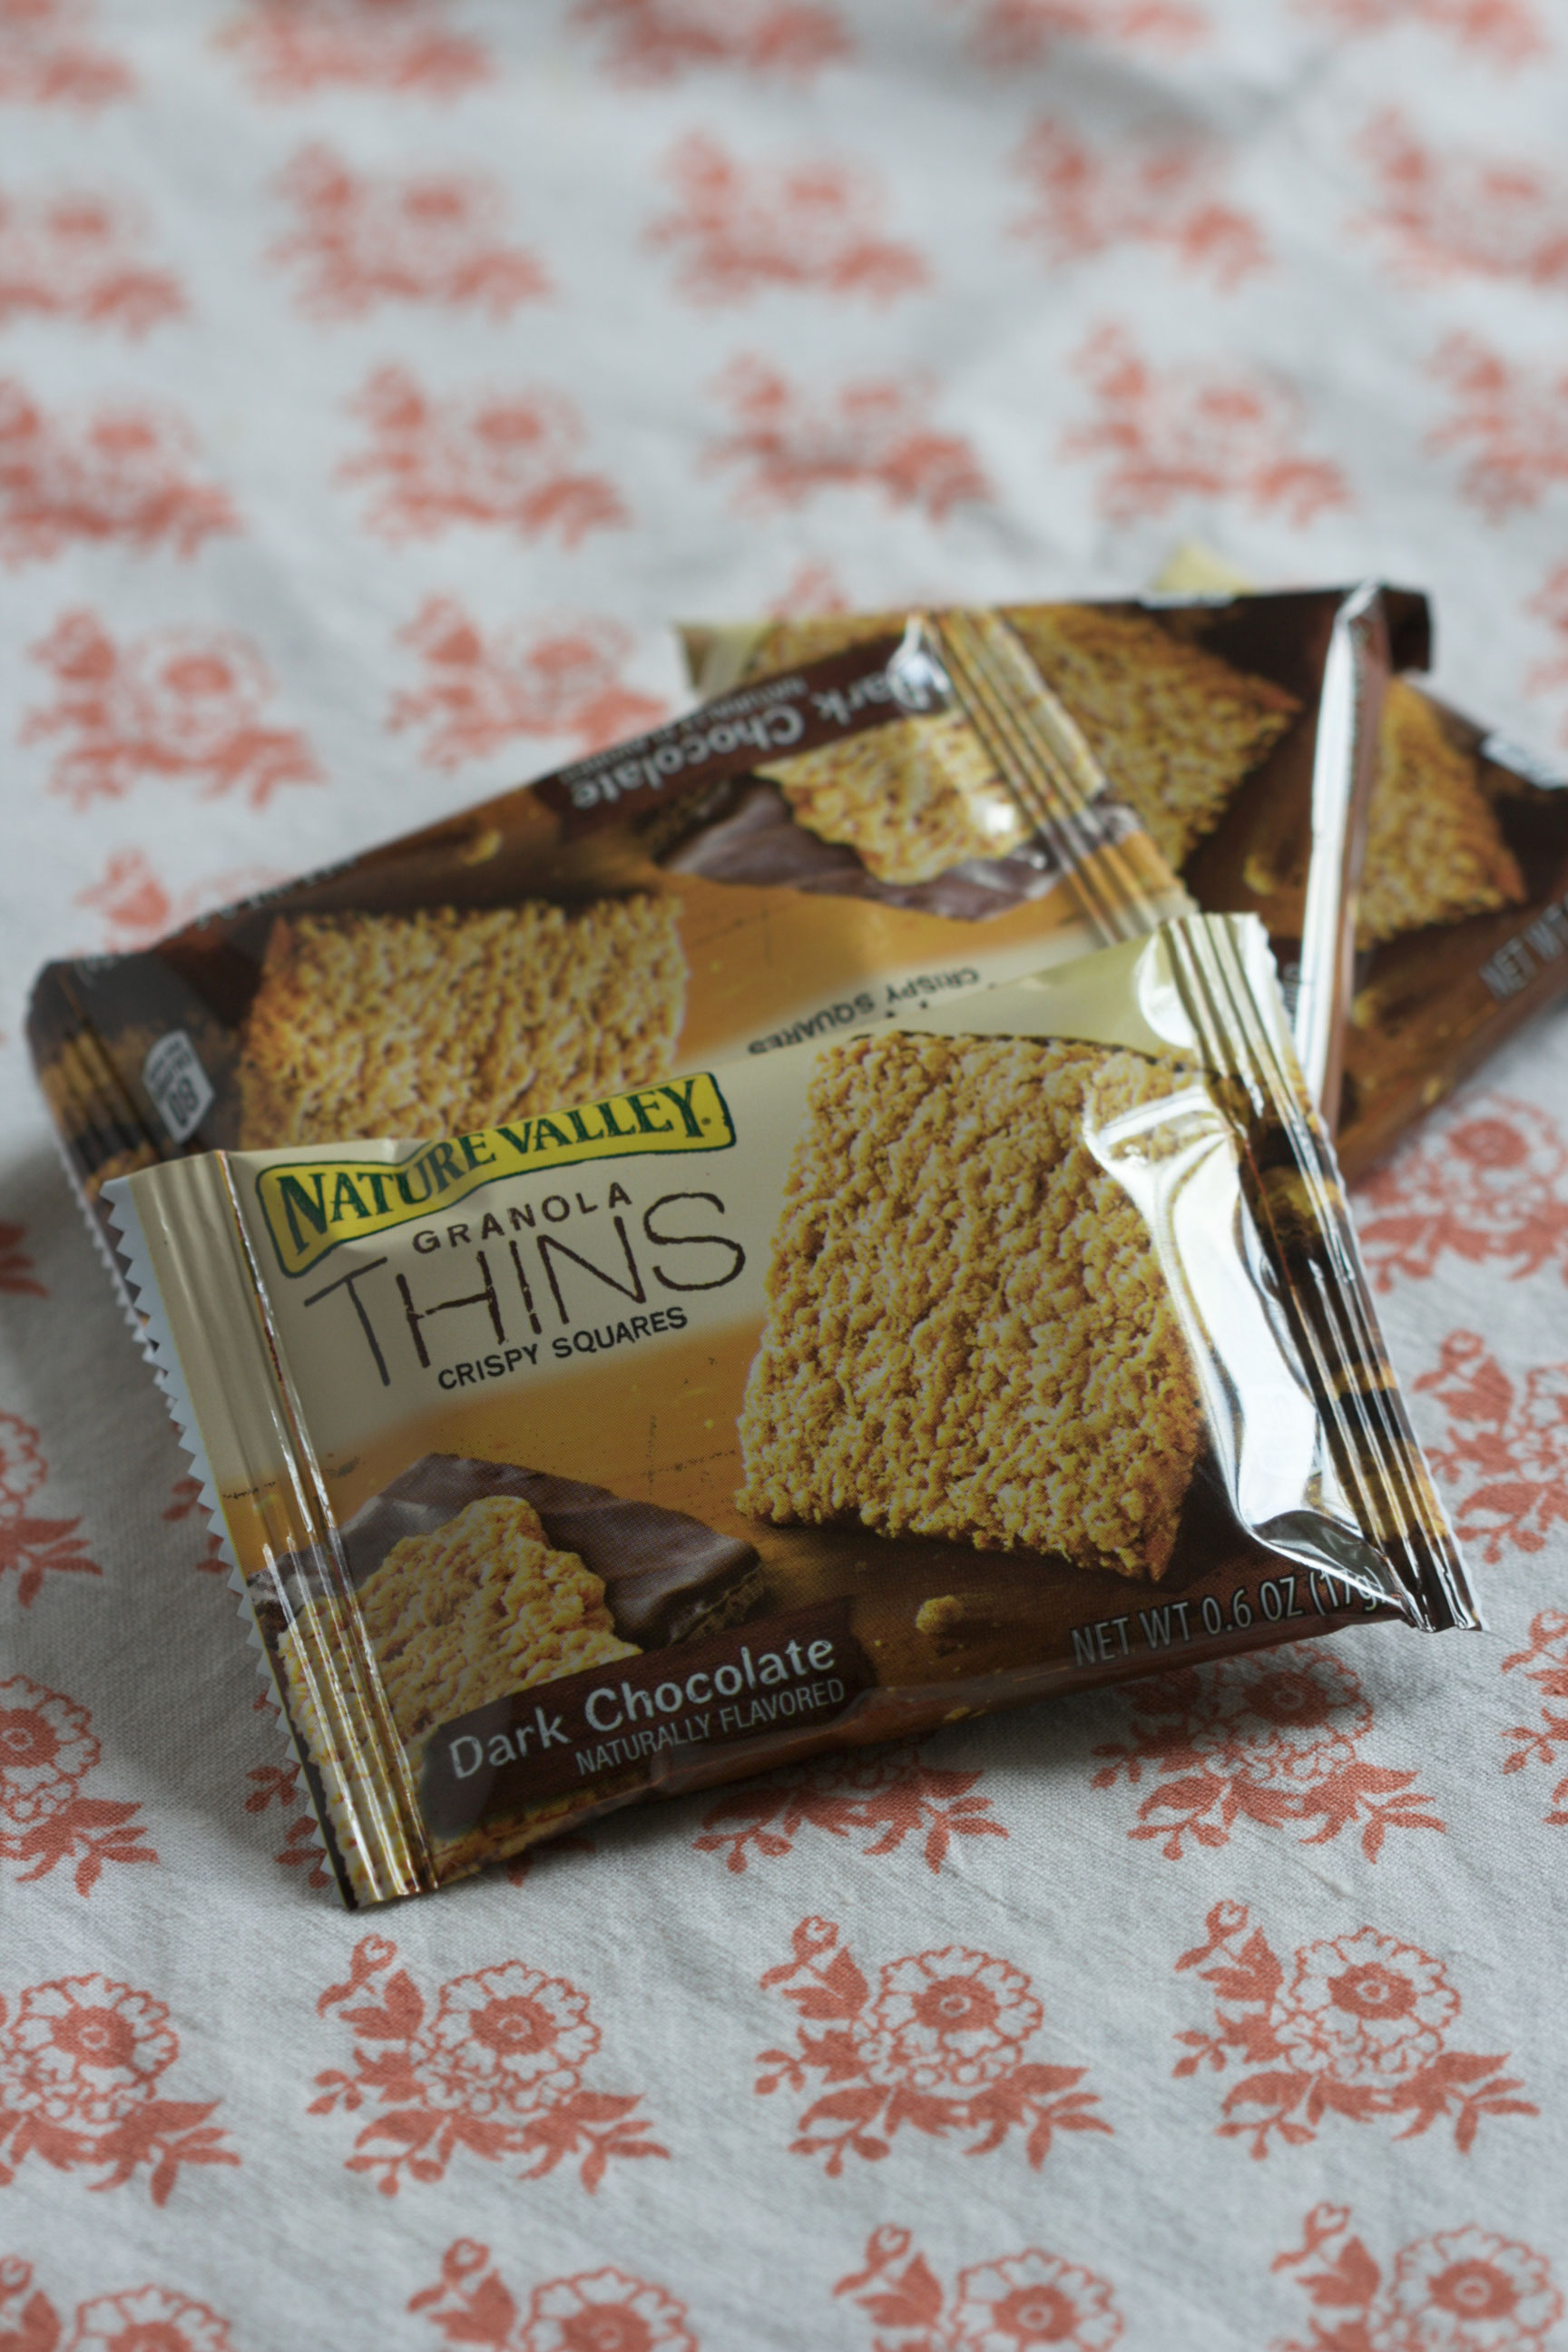 nature valley granola bars are the inspiration for these homemade dark chocolate granola bars.